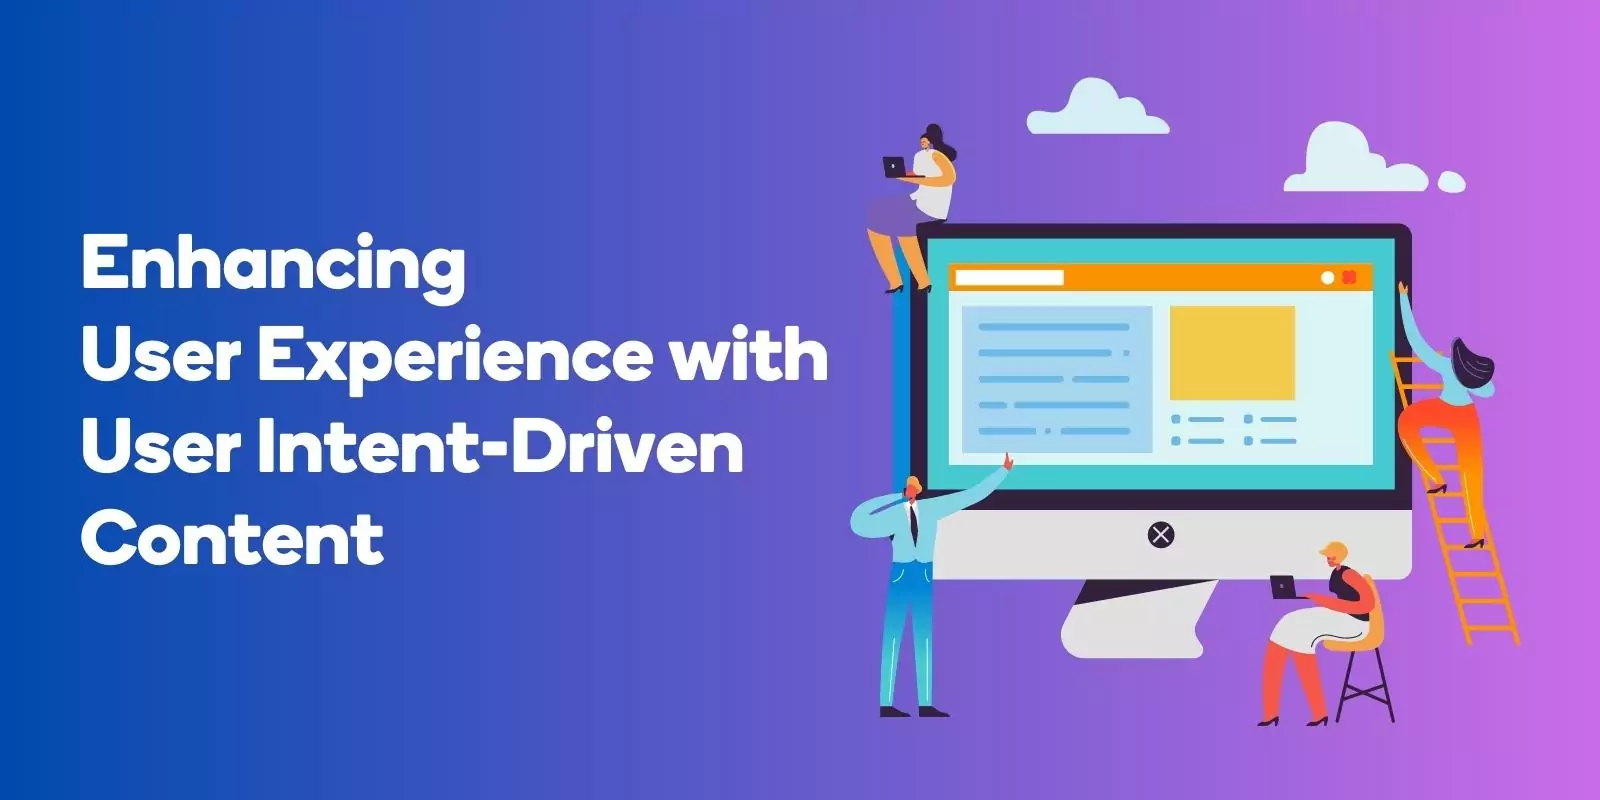 Enhancing User Experience with User Intent-Driven Content